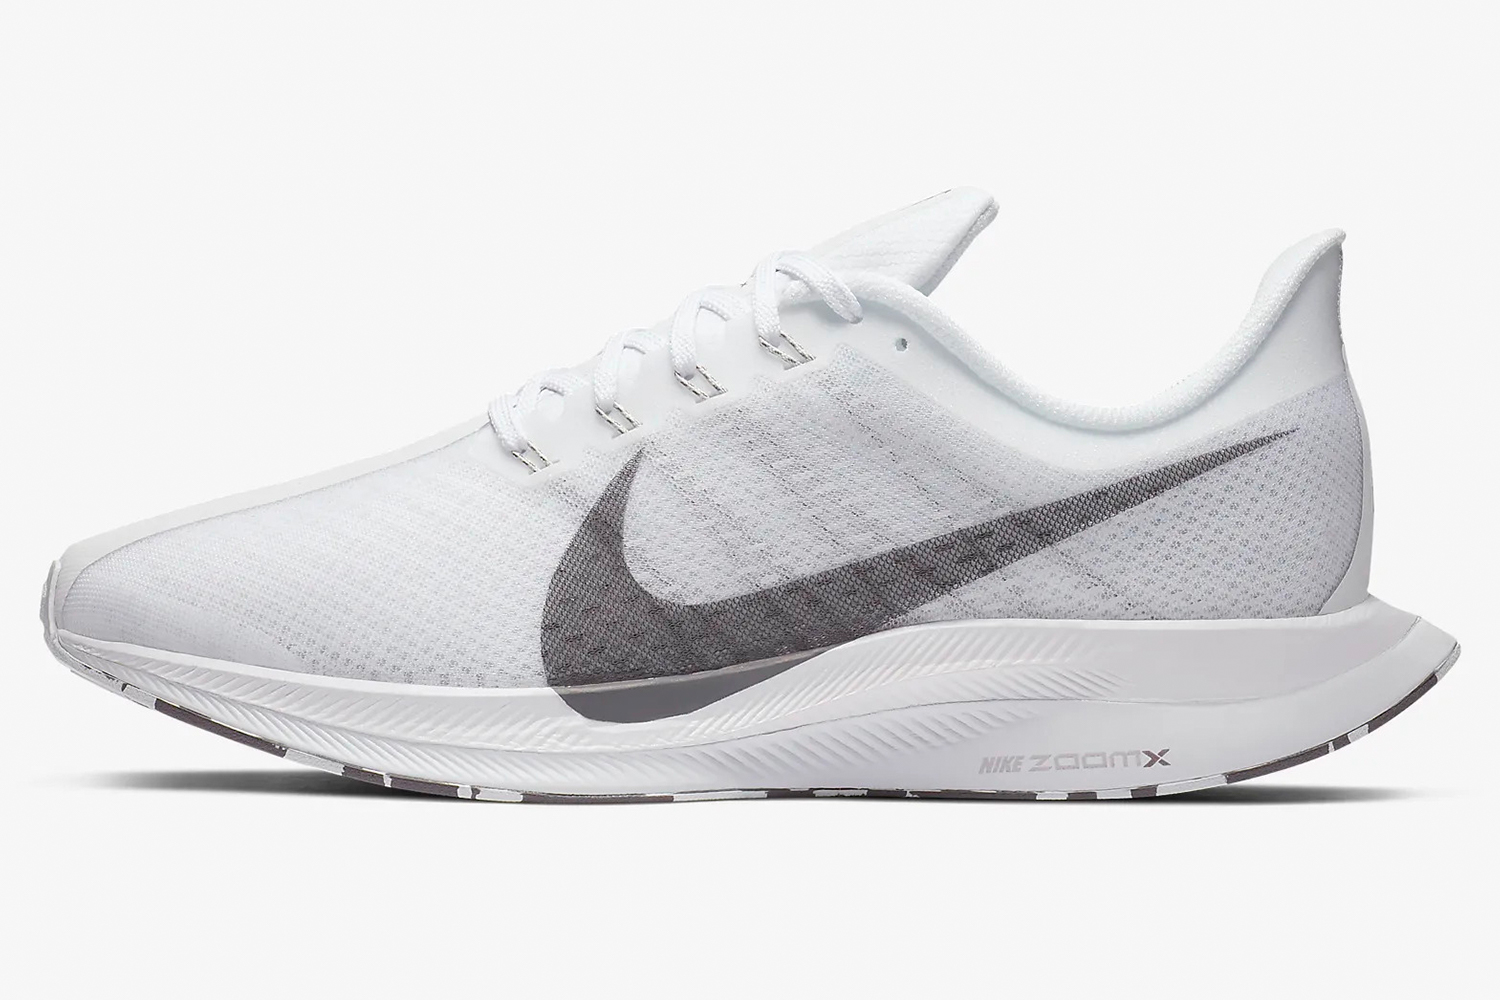 Nike Running Shoes and Sneakers Discounted Almost Half Off